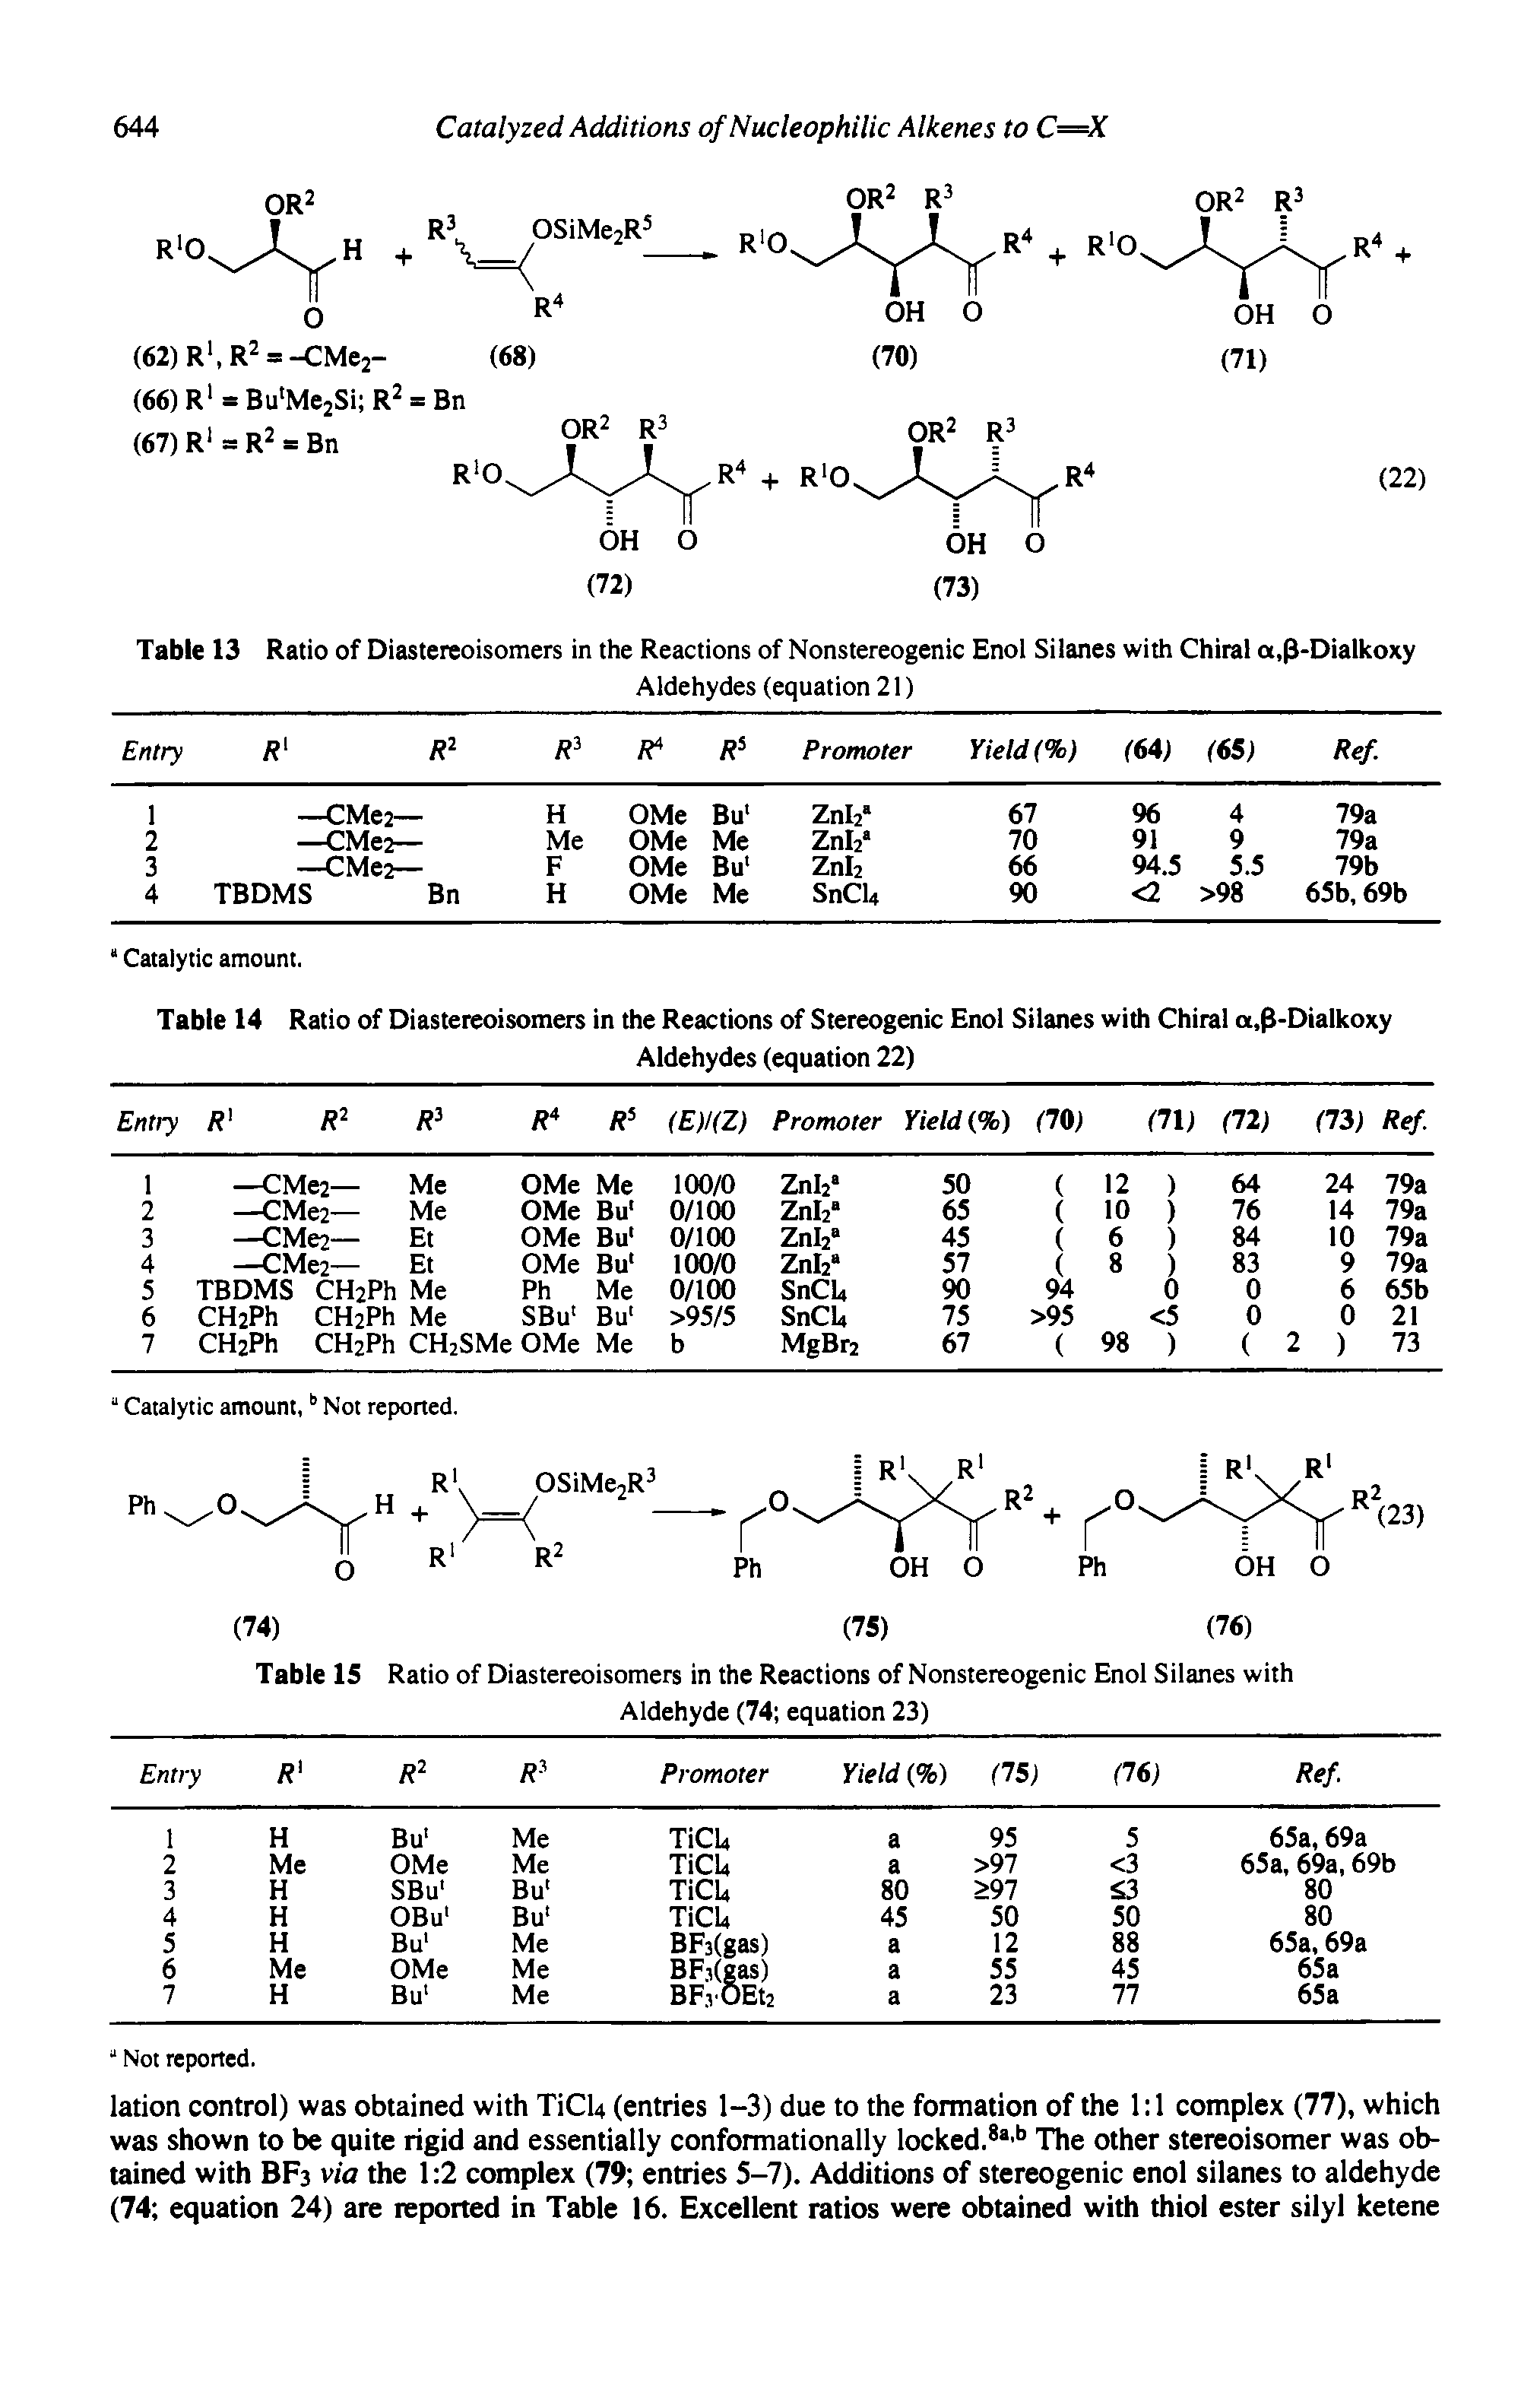 Table 13 Ratio of Diastereoisomers in the Reactions of Nonstereogenic Enol Silanes with Chiral a,p-Dialkoxy...